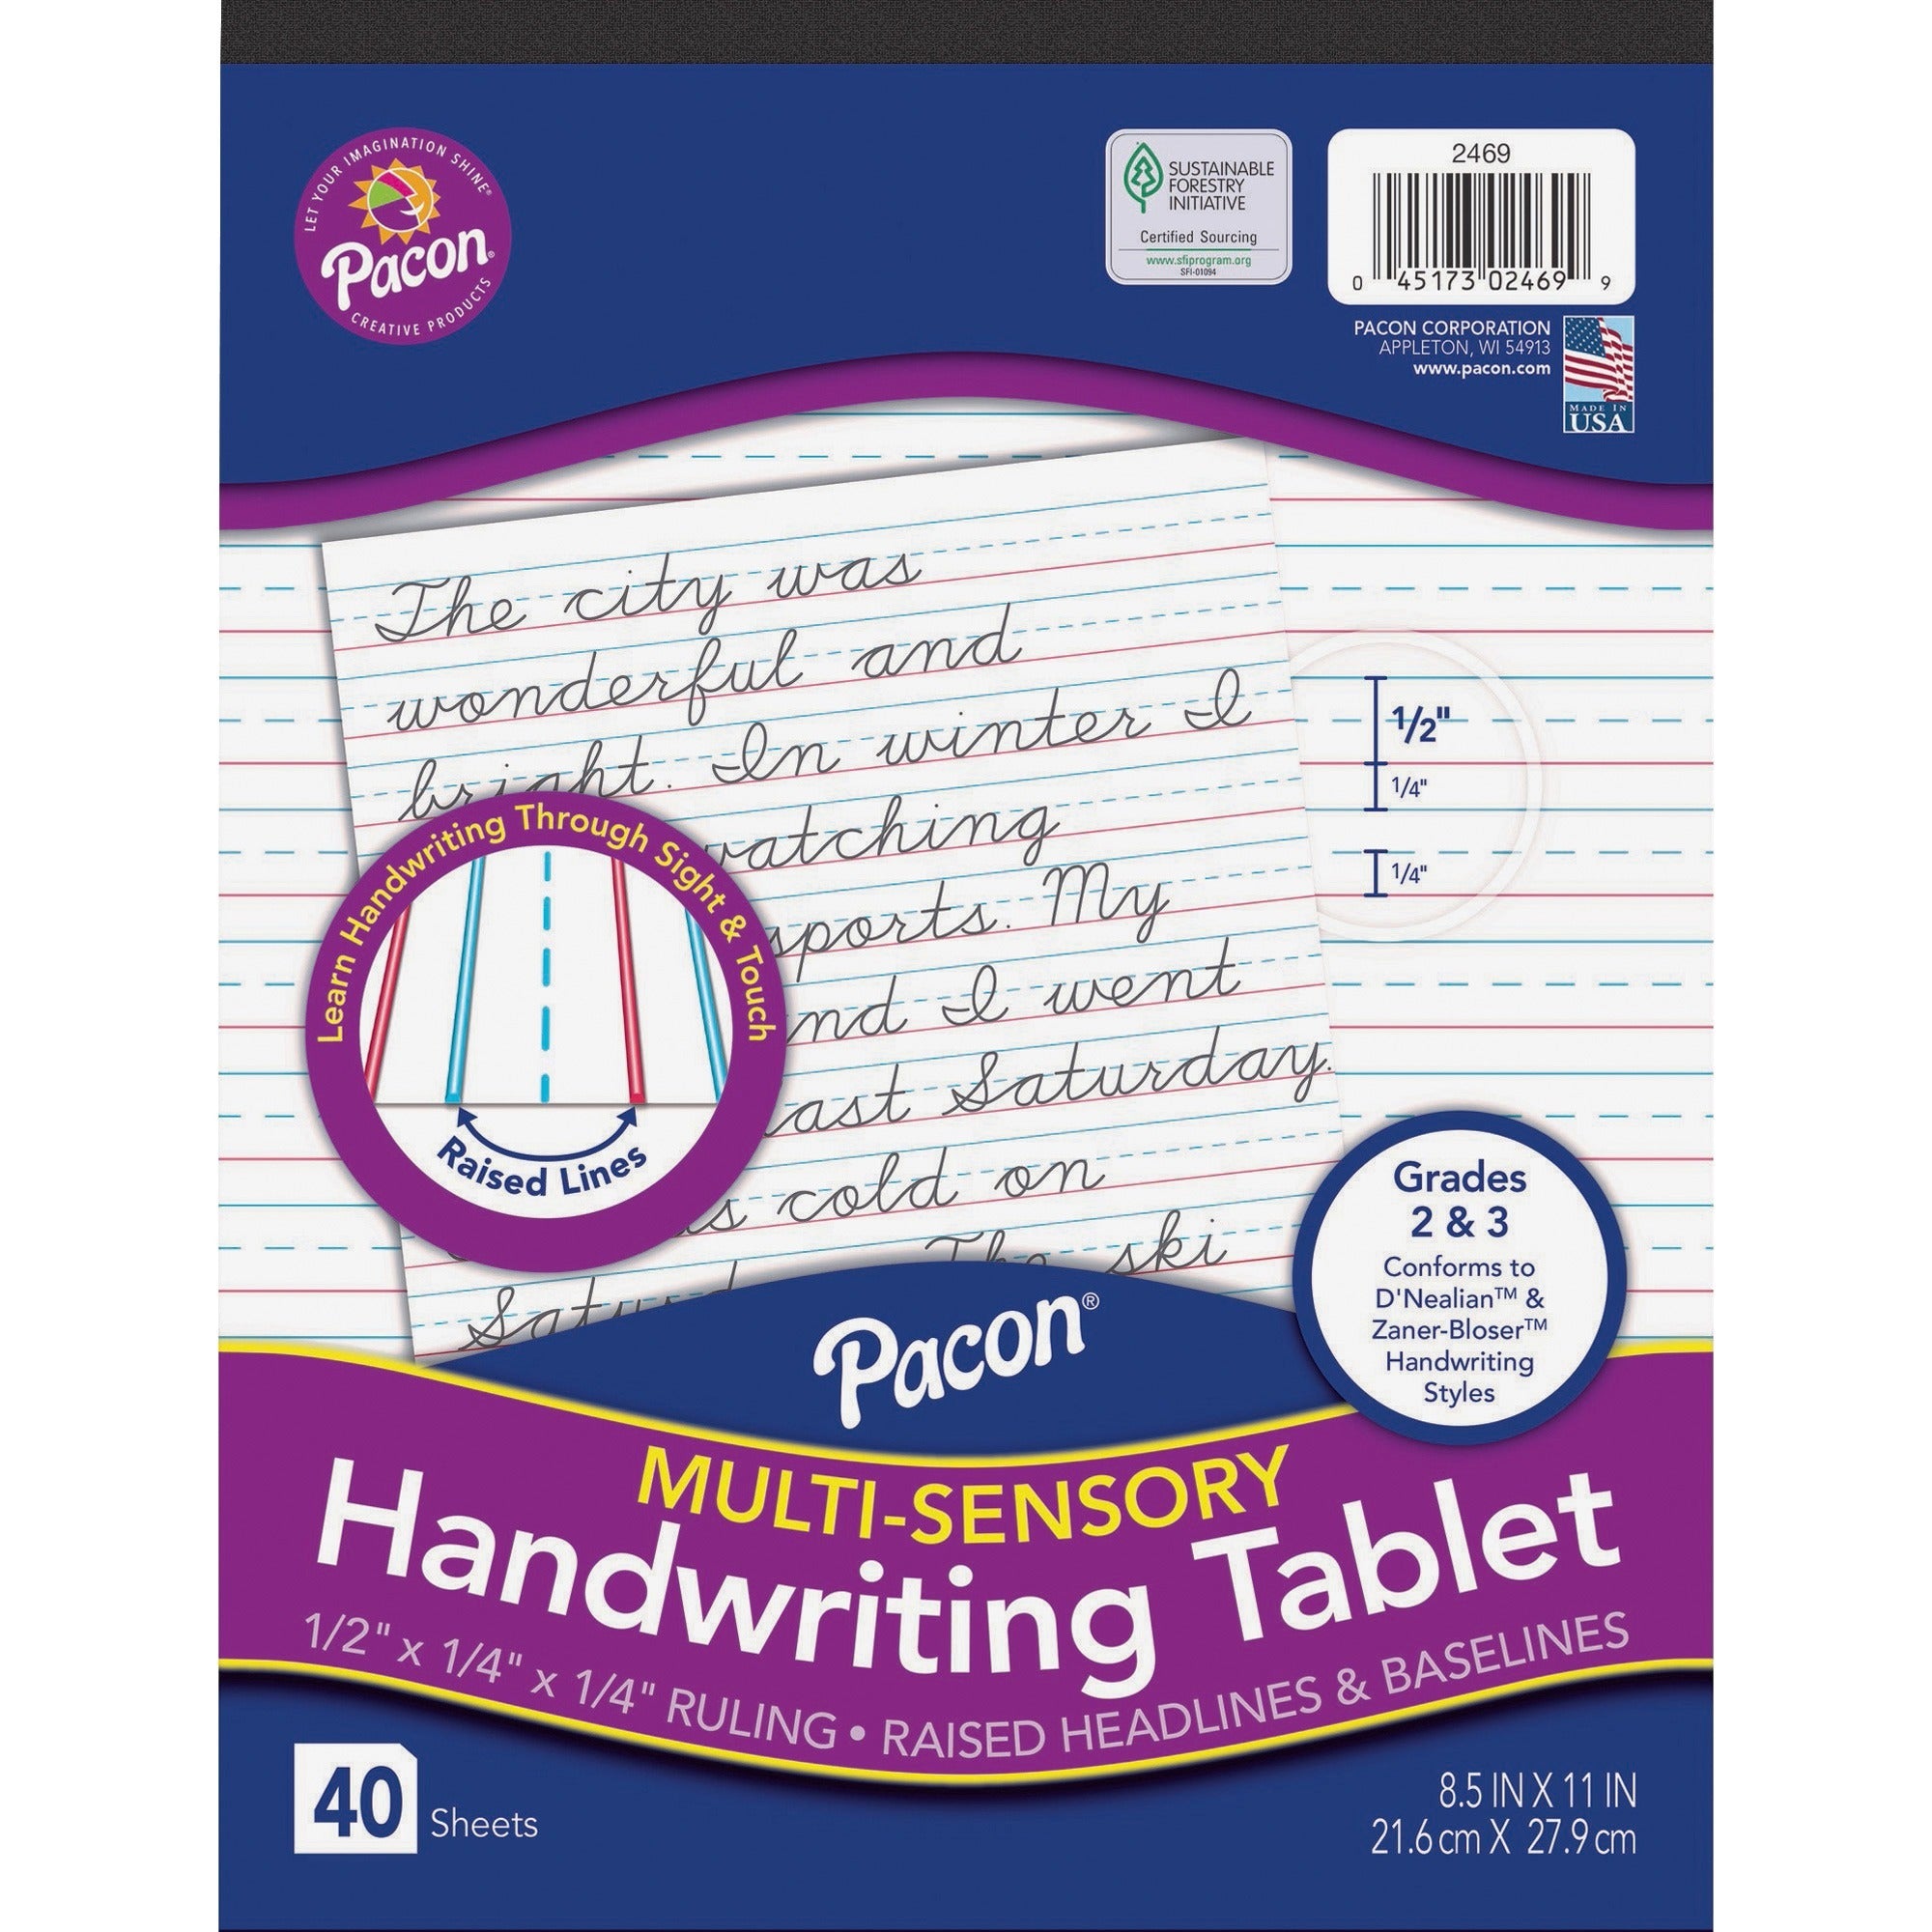 pacon-multi-sensory-ruled-handwriting-tablet-student-1-each-white_pacp2469 - 1